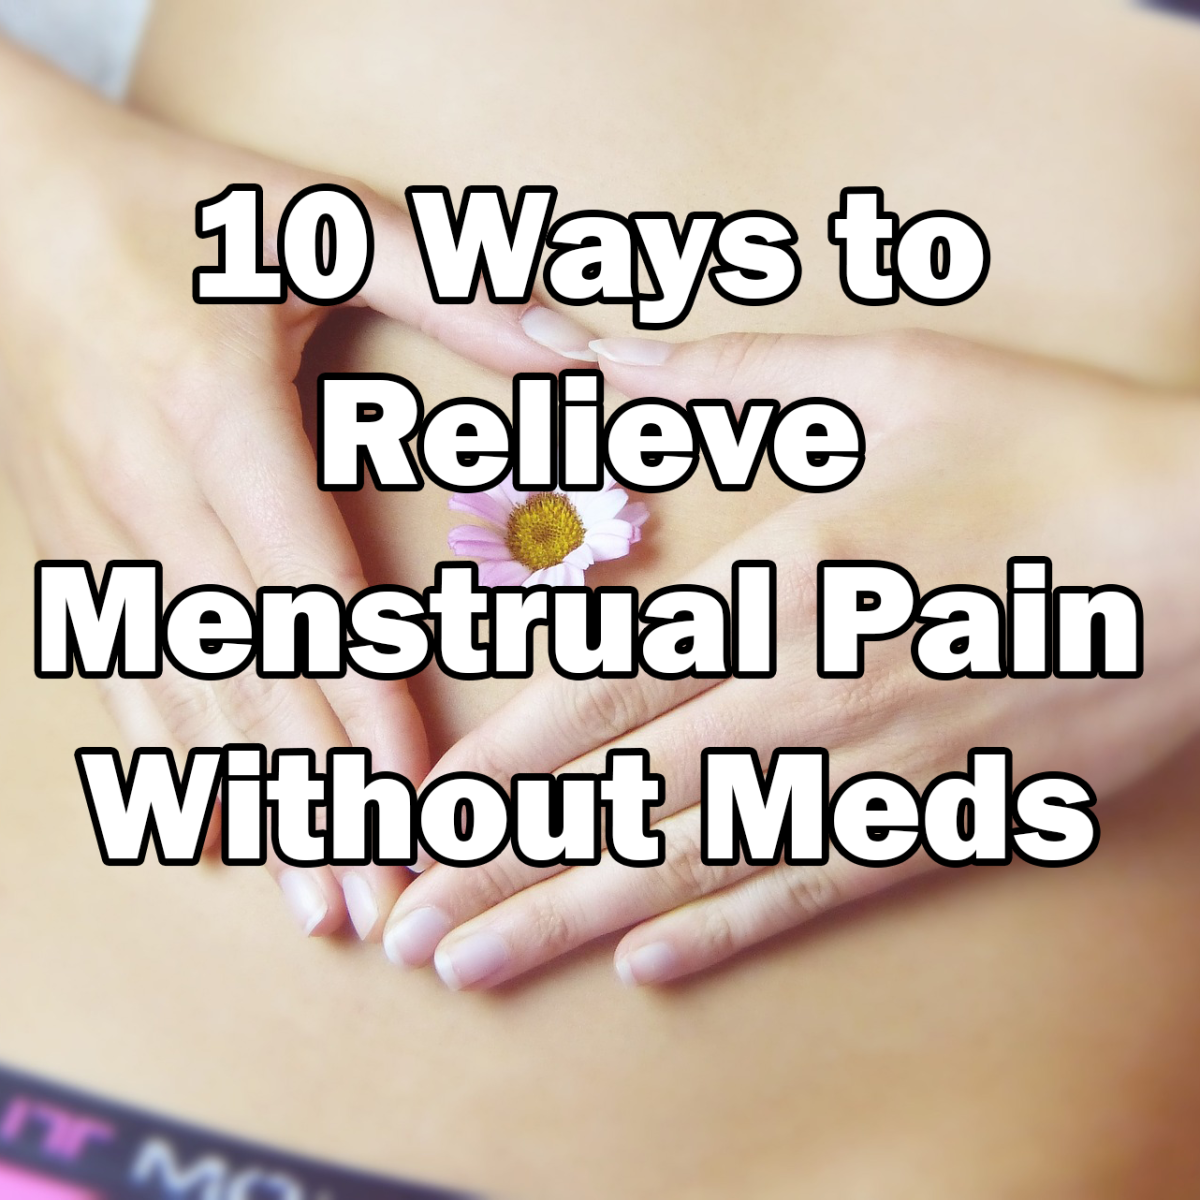 There are many ways to relieve period pain without having to take painkiller meds.